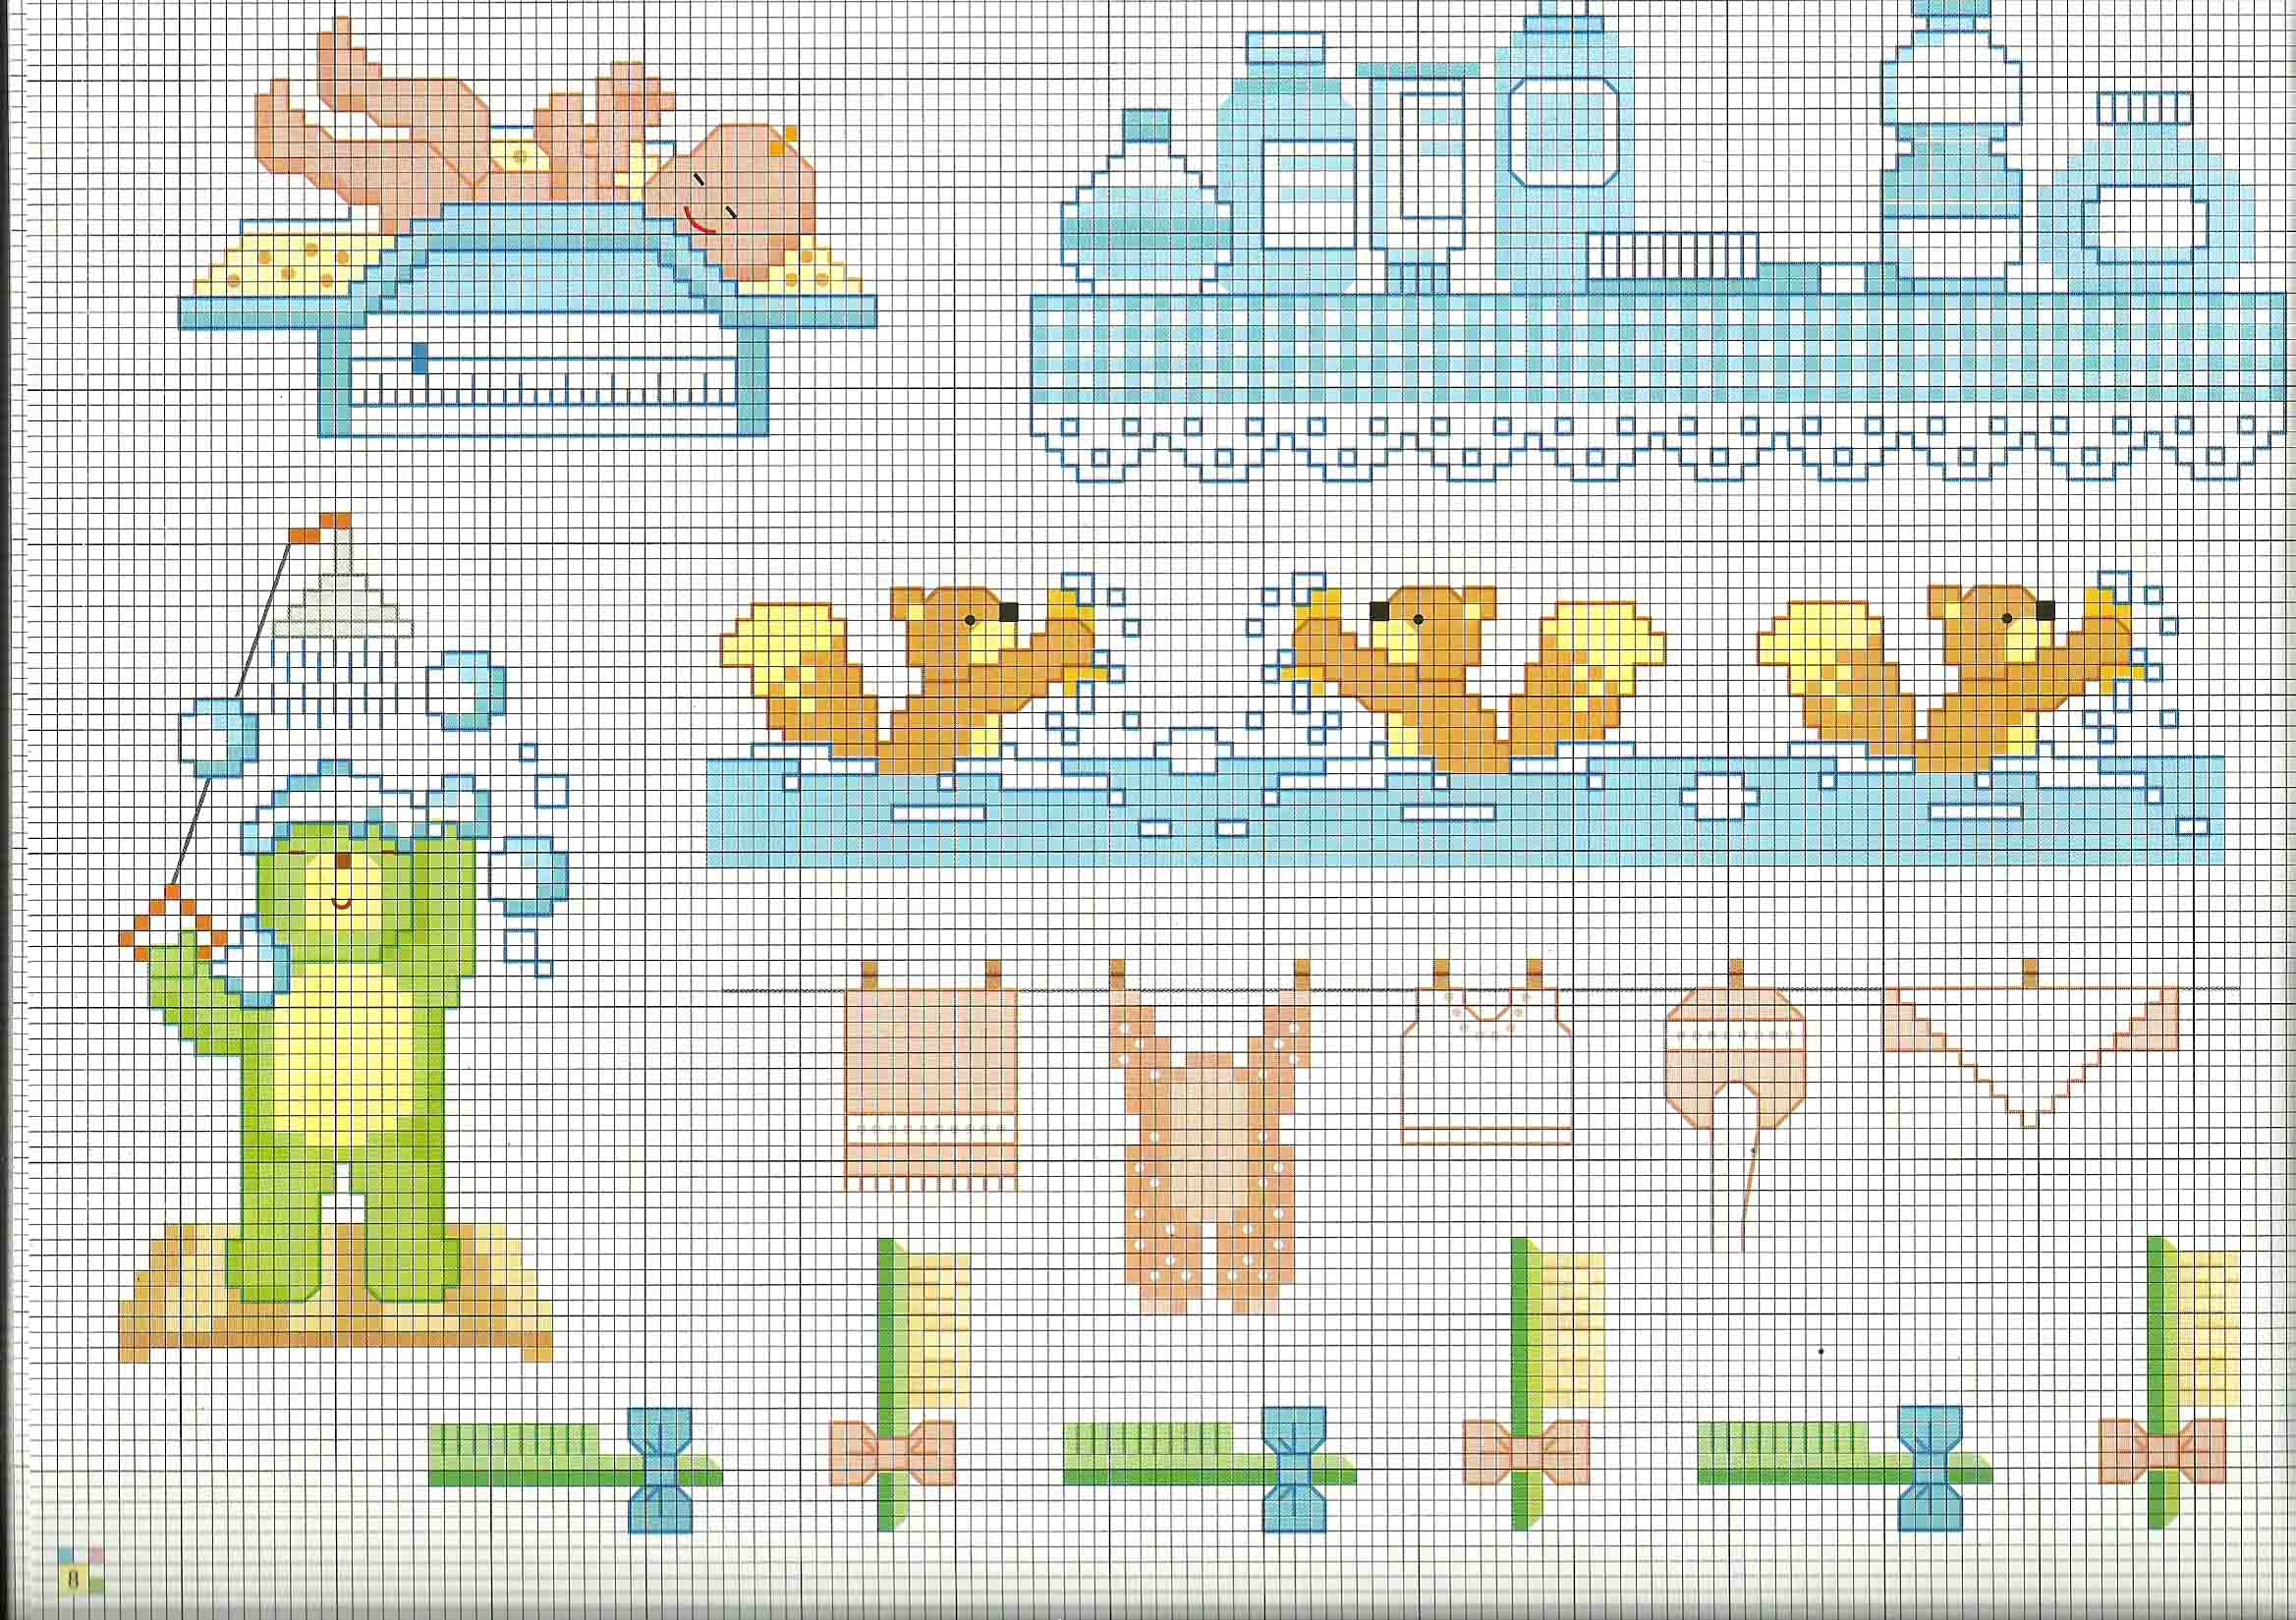 Cross stitch borders for baby blanket or cot sheets bath brushes